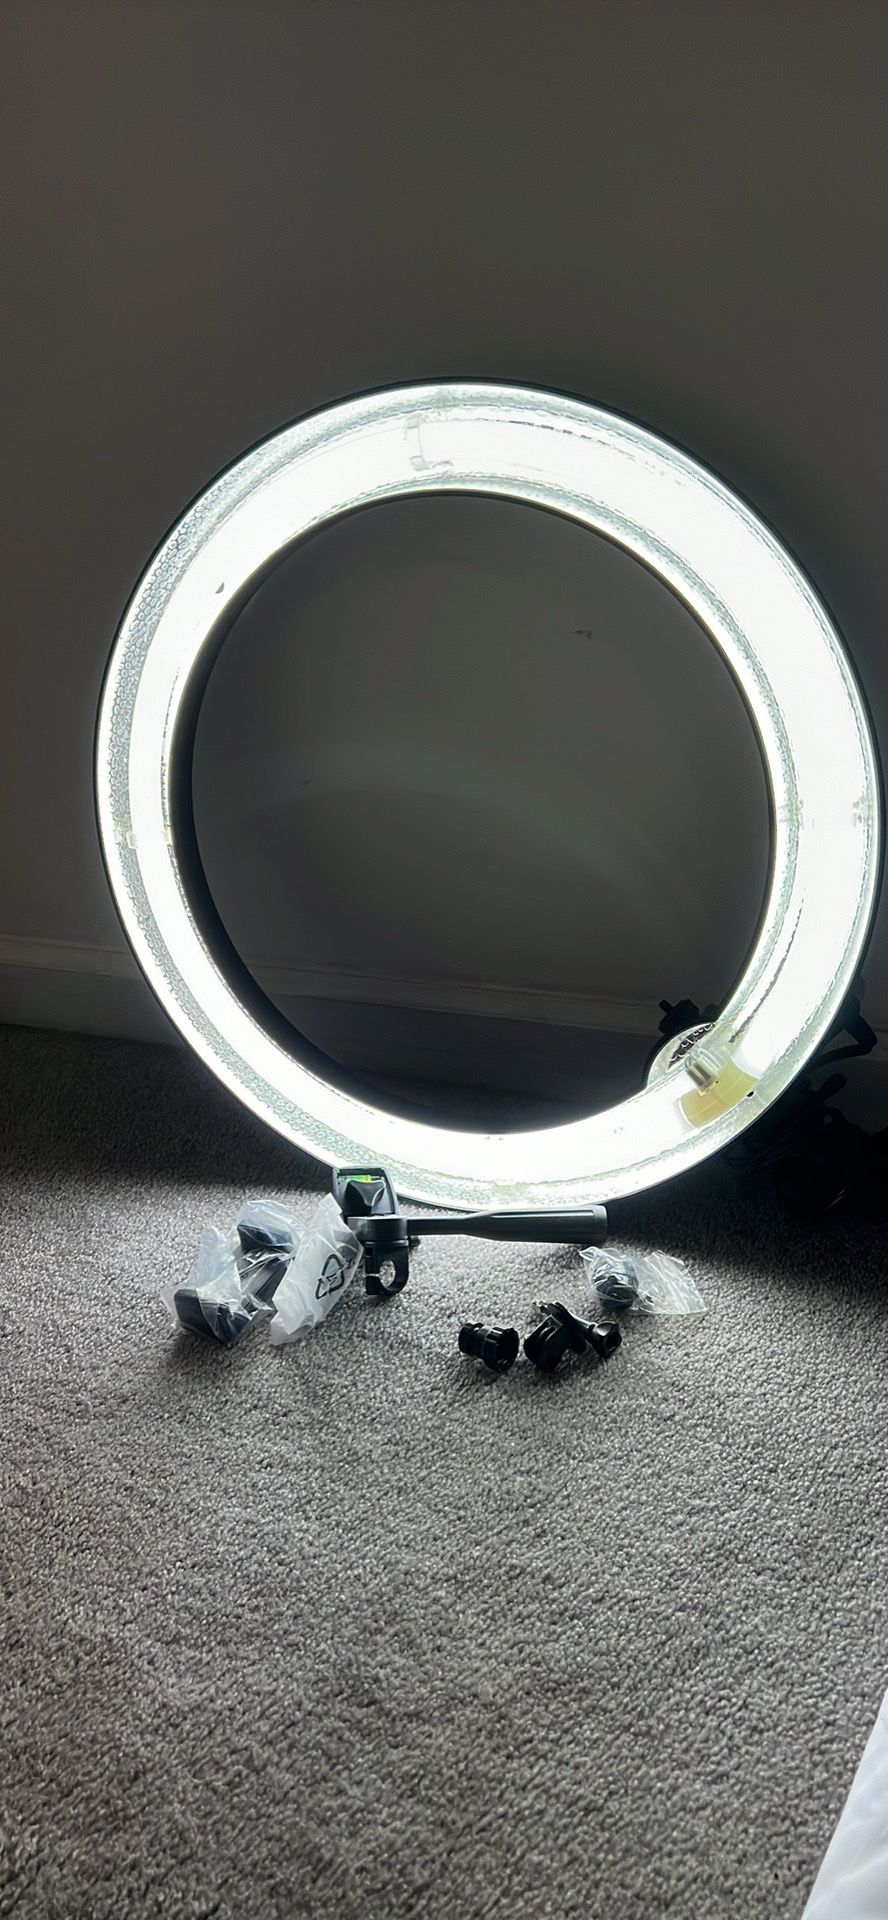 18” Ring Light No Stand Included